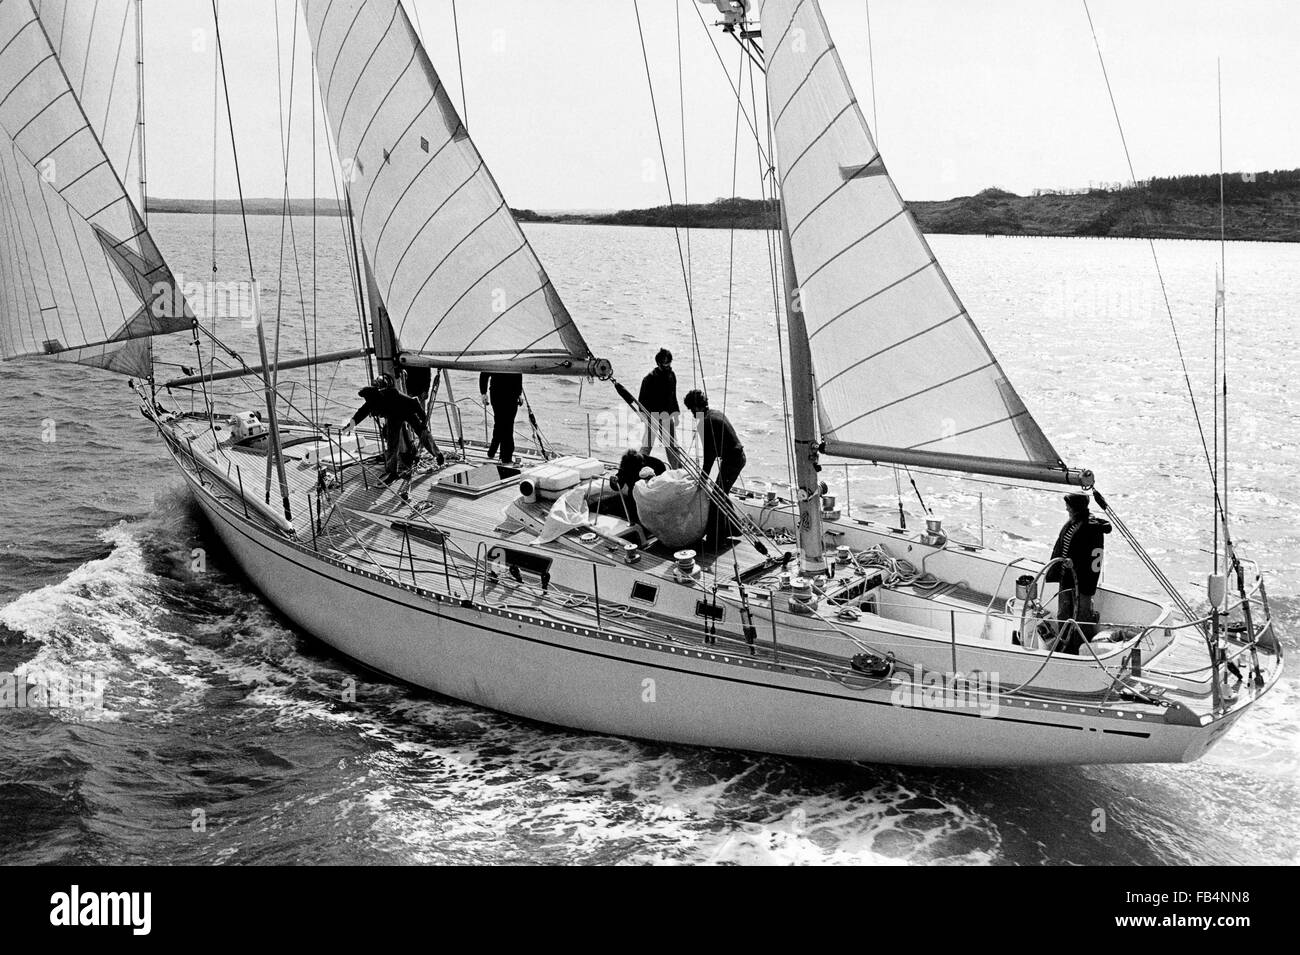 AJAX NEWS PHOTOS - 1977. SOLENT, ENGLAND. - WHITBREAD RACE ENTRY - CLARE FRANCIS (GB) SKIPPERED THE BIG SPARKMAN & STEPHENS DESIGNED 70 FT KETCH ADC ACCUTRAC IN THE 1977/78 WHITBREAD ROUND THE WORLD RACE.  PHOTO:JONATHAN EASTLAND/AJAX  REF:ACCUTRAC 1977 1 Stock Photo